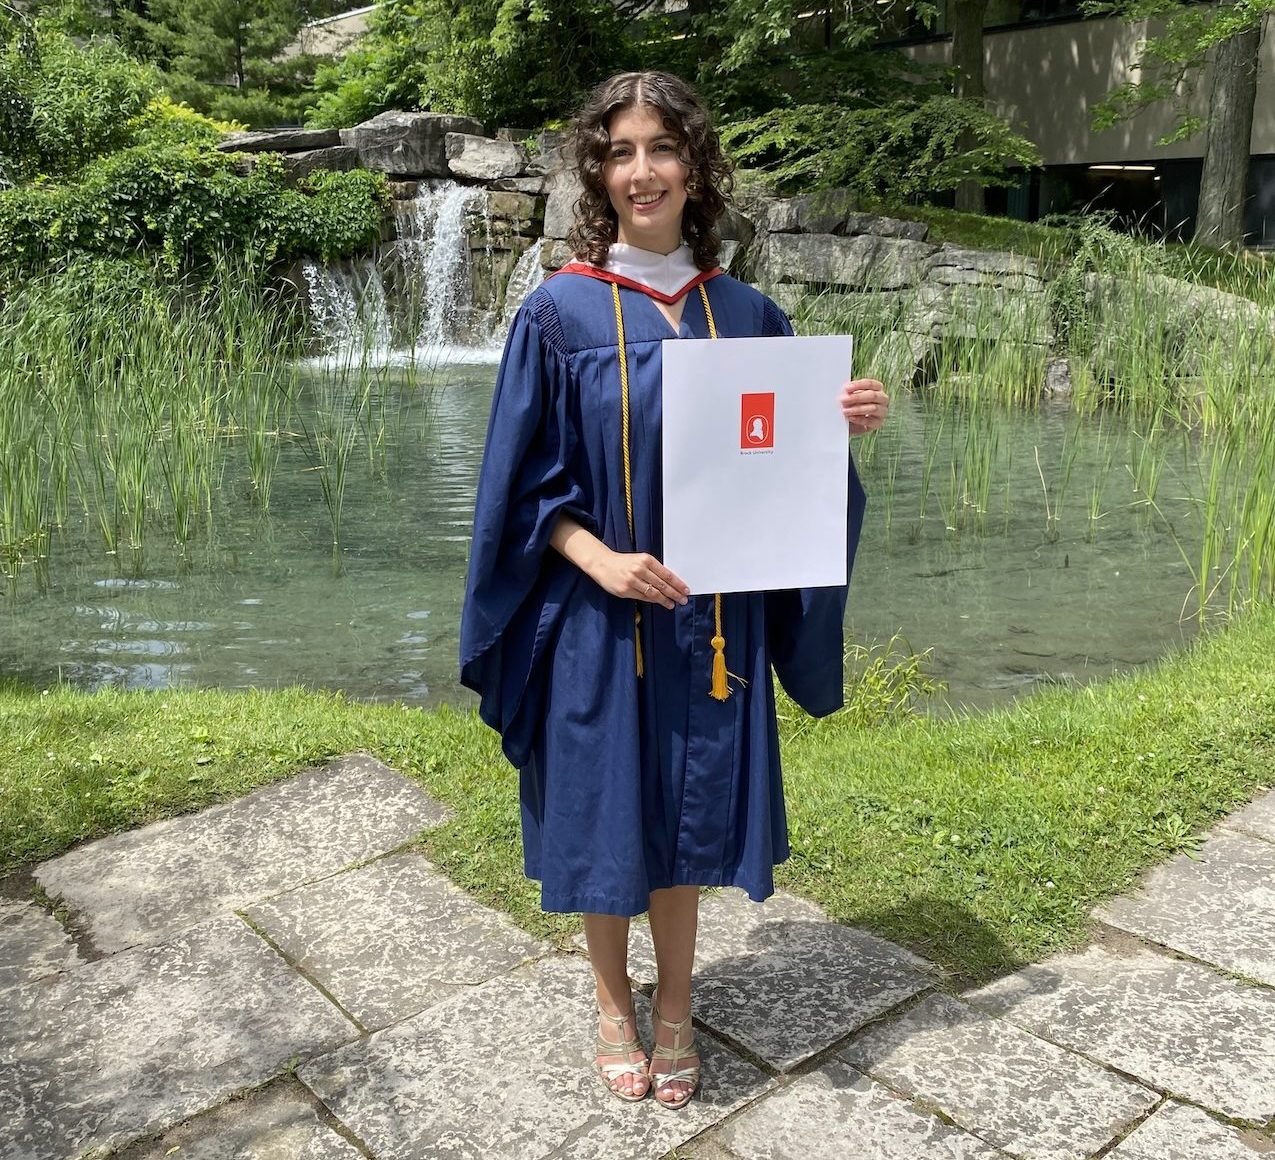 Brontë Slote (BA ’24) standing in Brock University's Pond Inlet wearing a graduation gown and holding up an envelope with the Brock University logo.